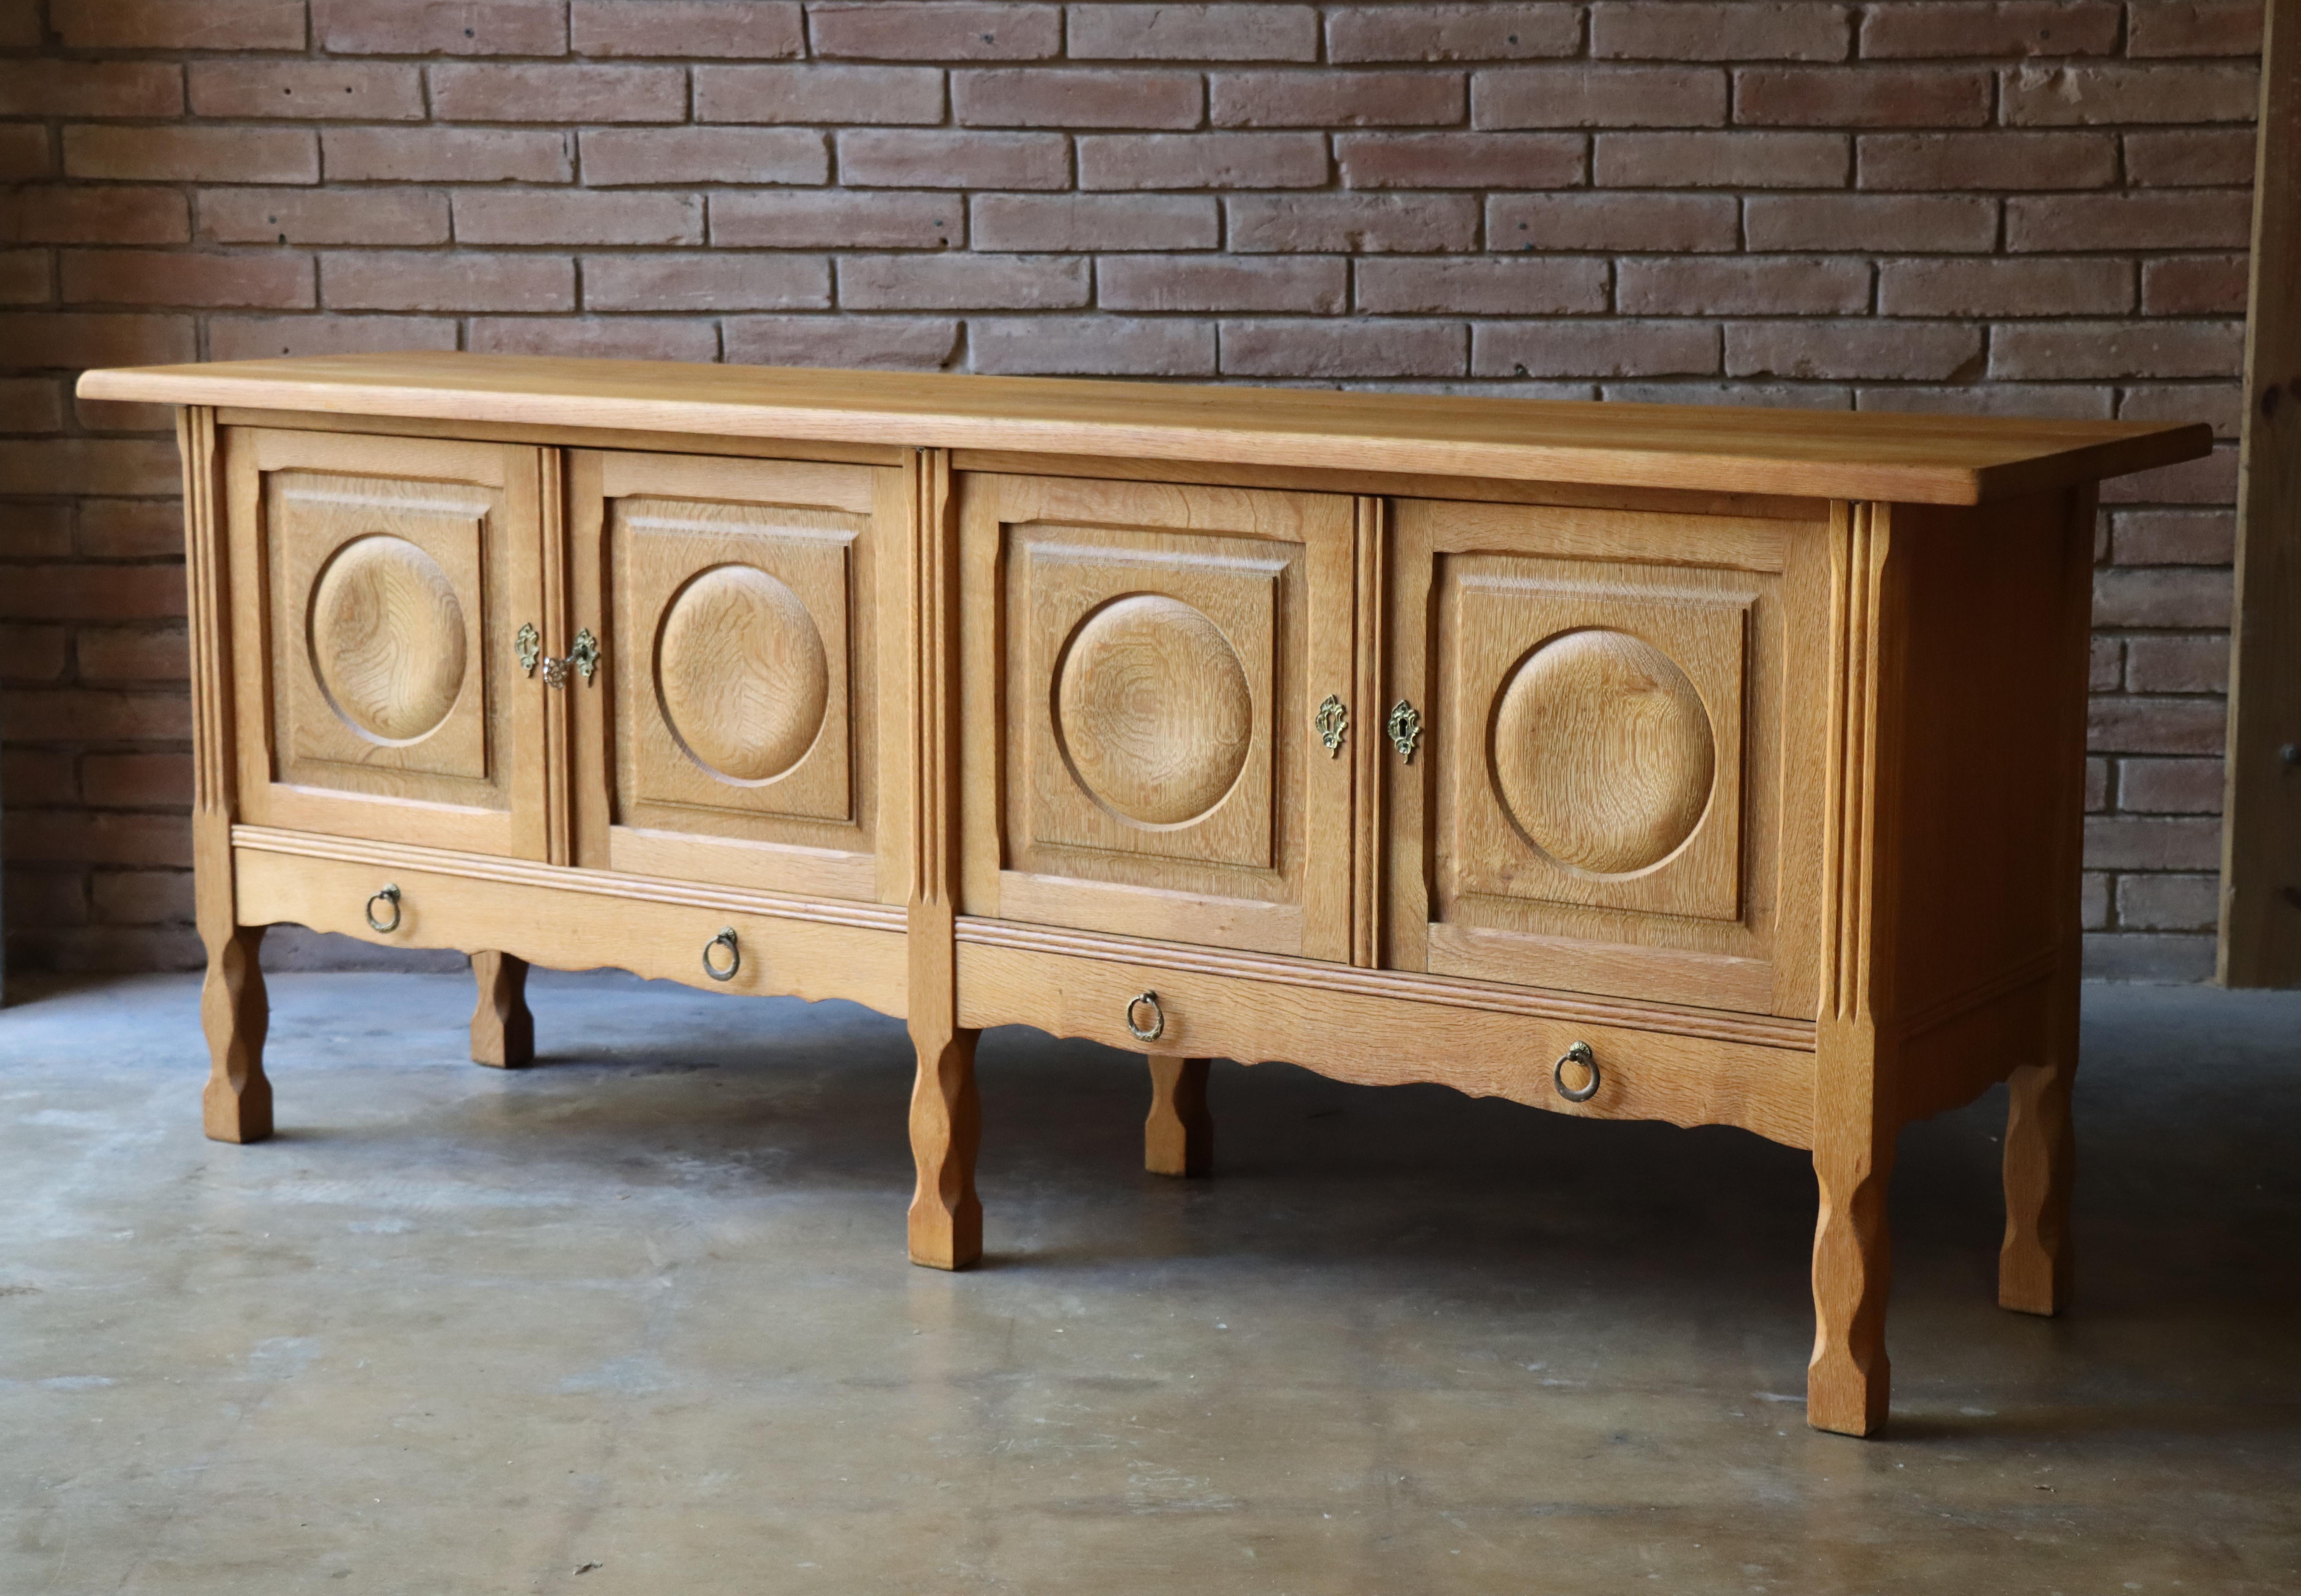 Danish sideboard attributed to Henry (Henning) Kjaernulf, c. 1960s. Handcrafted from completely solid quarter-sawn oak, this statement cabinet offers ample storage and looks good while doing it. 

Each cabinet door opens to reveal a solid oak